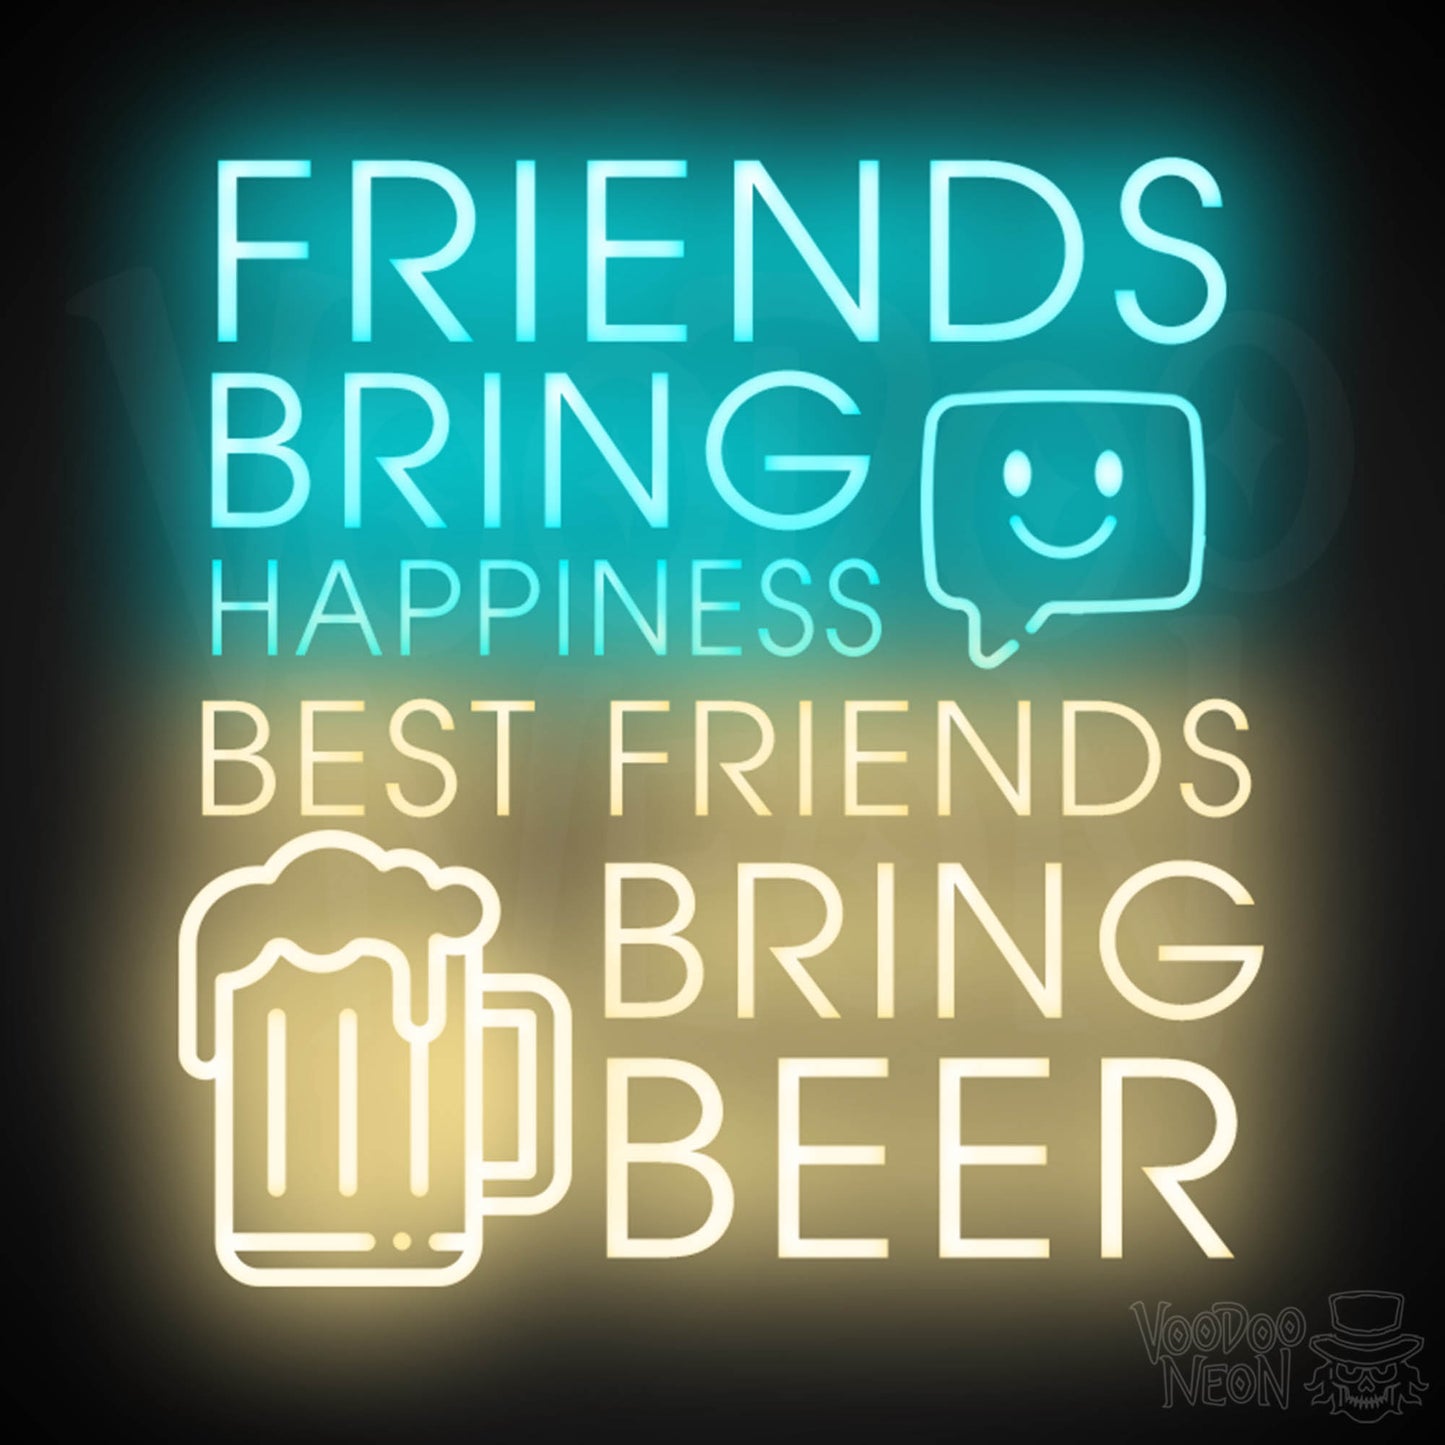 Friends Bring Happiness Best Friends Bring Beer Neon Sign - LED Lights Wall Art - Color Multi-Color